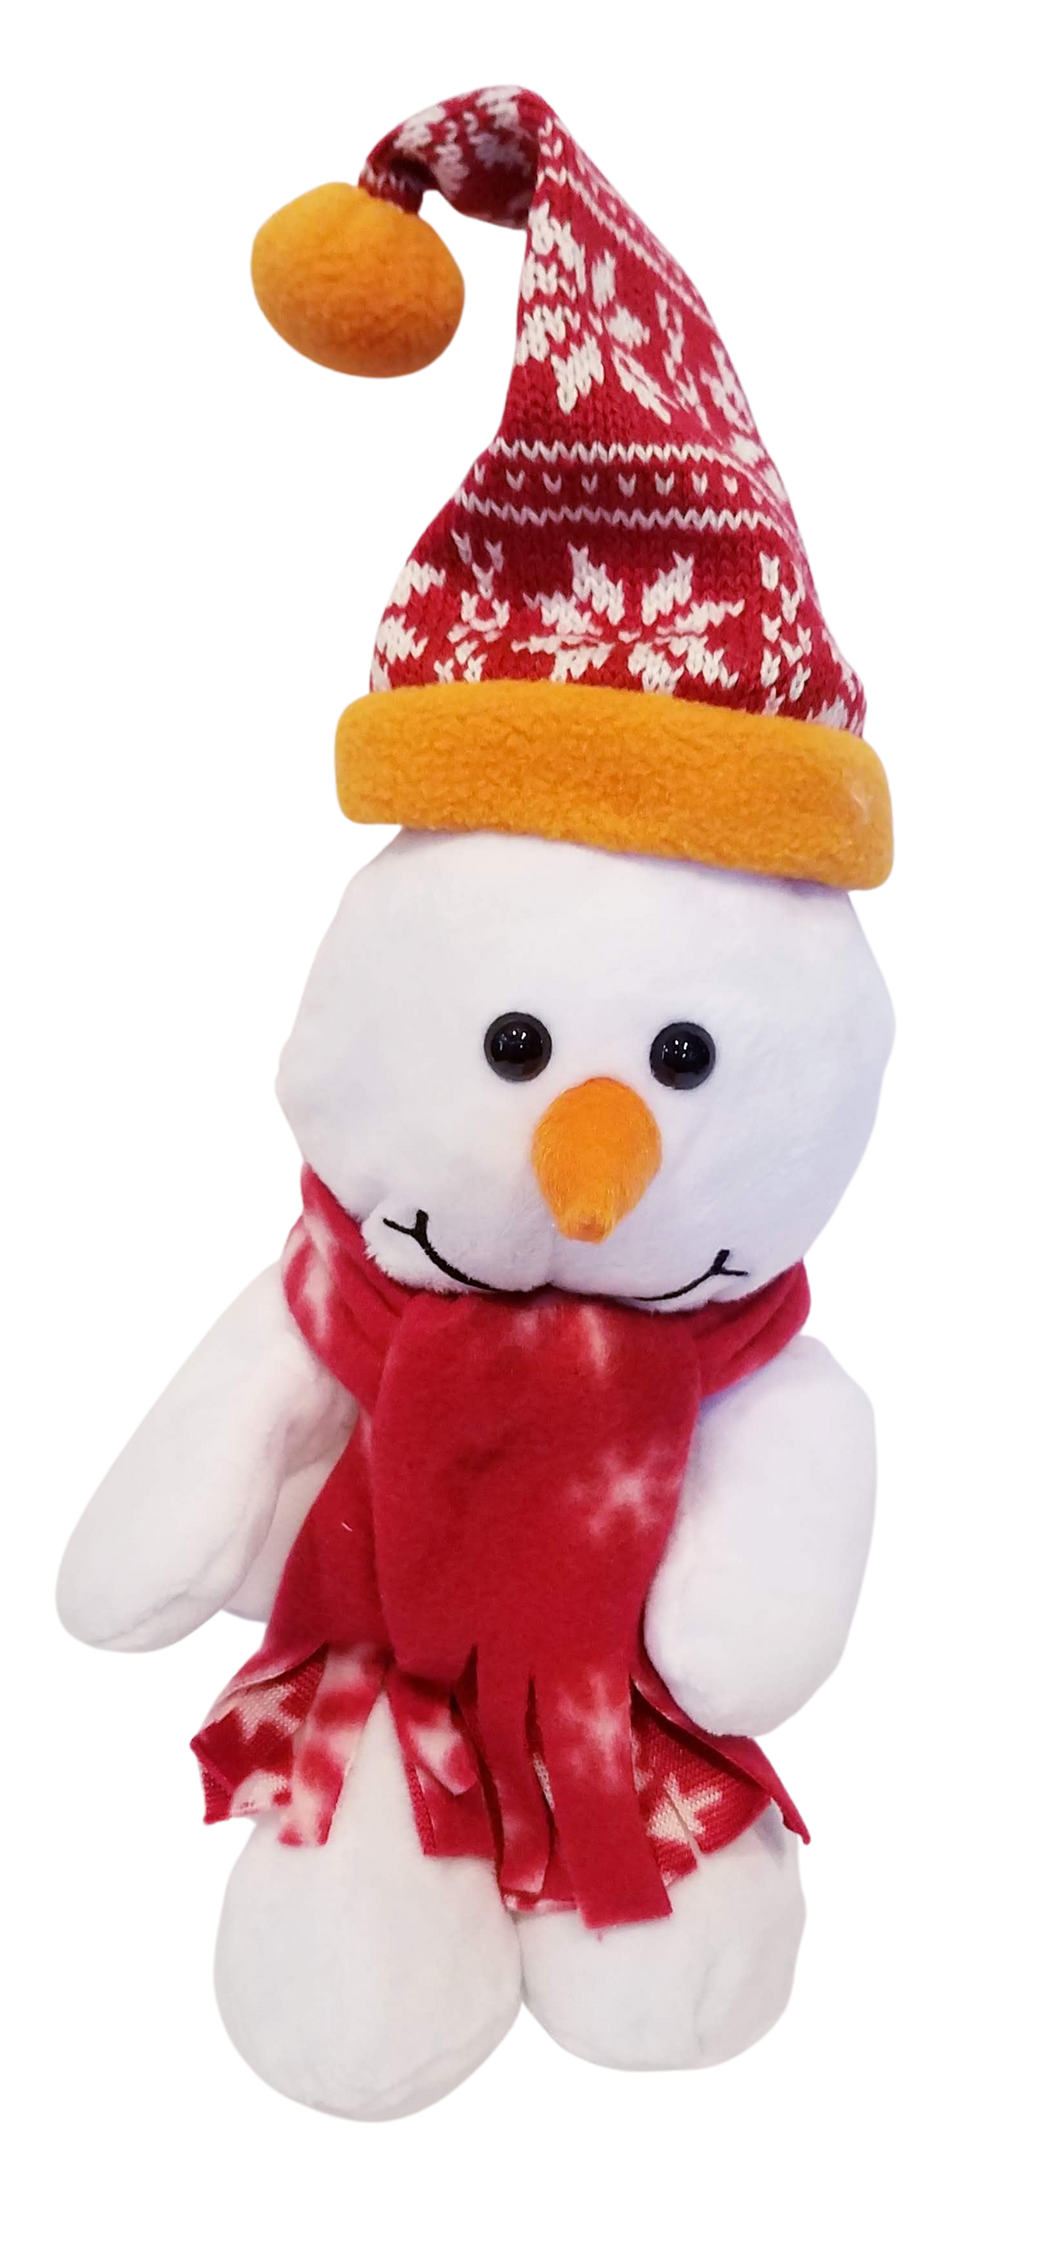 Plush snowman w red hat/red scarf with snowflakes 12